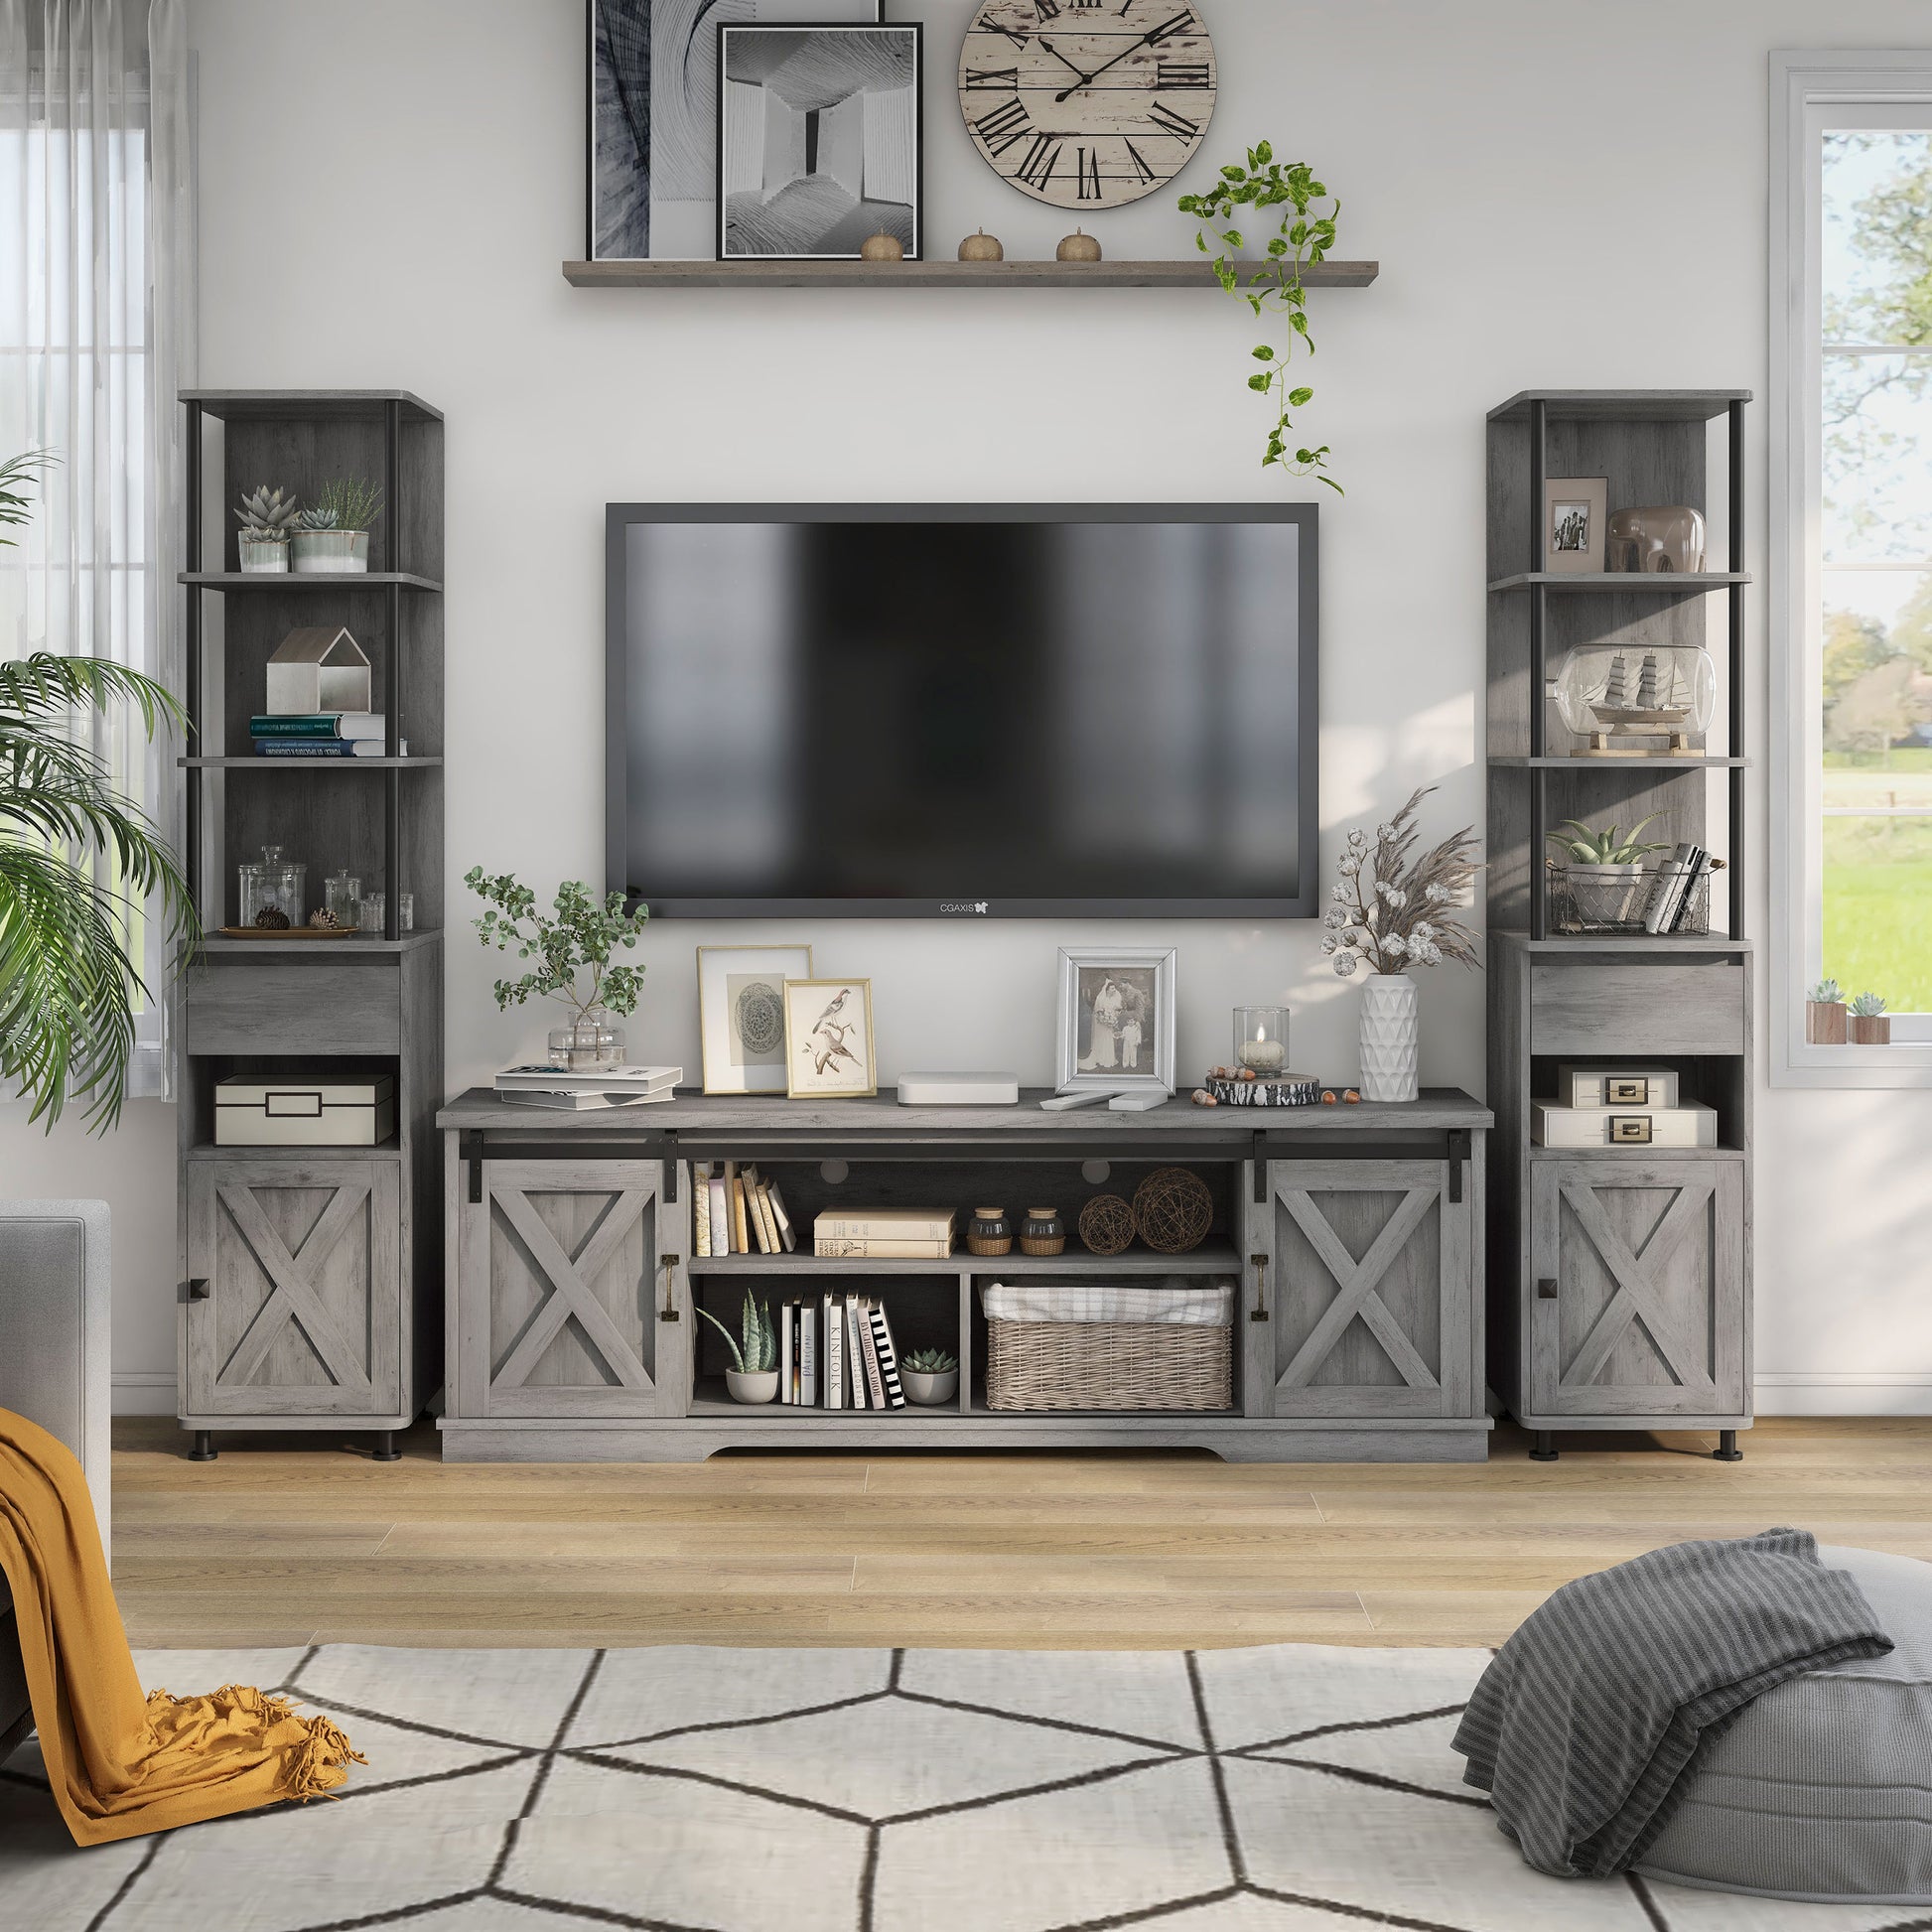 Front facing three-piece rustic vintage gray oak TV stand and pier entertainment set in a living room with accessories